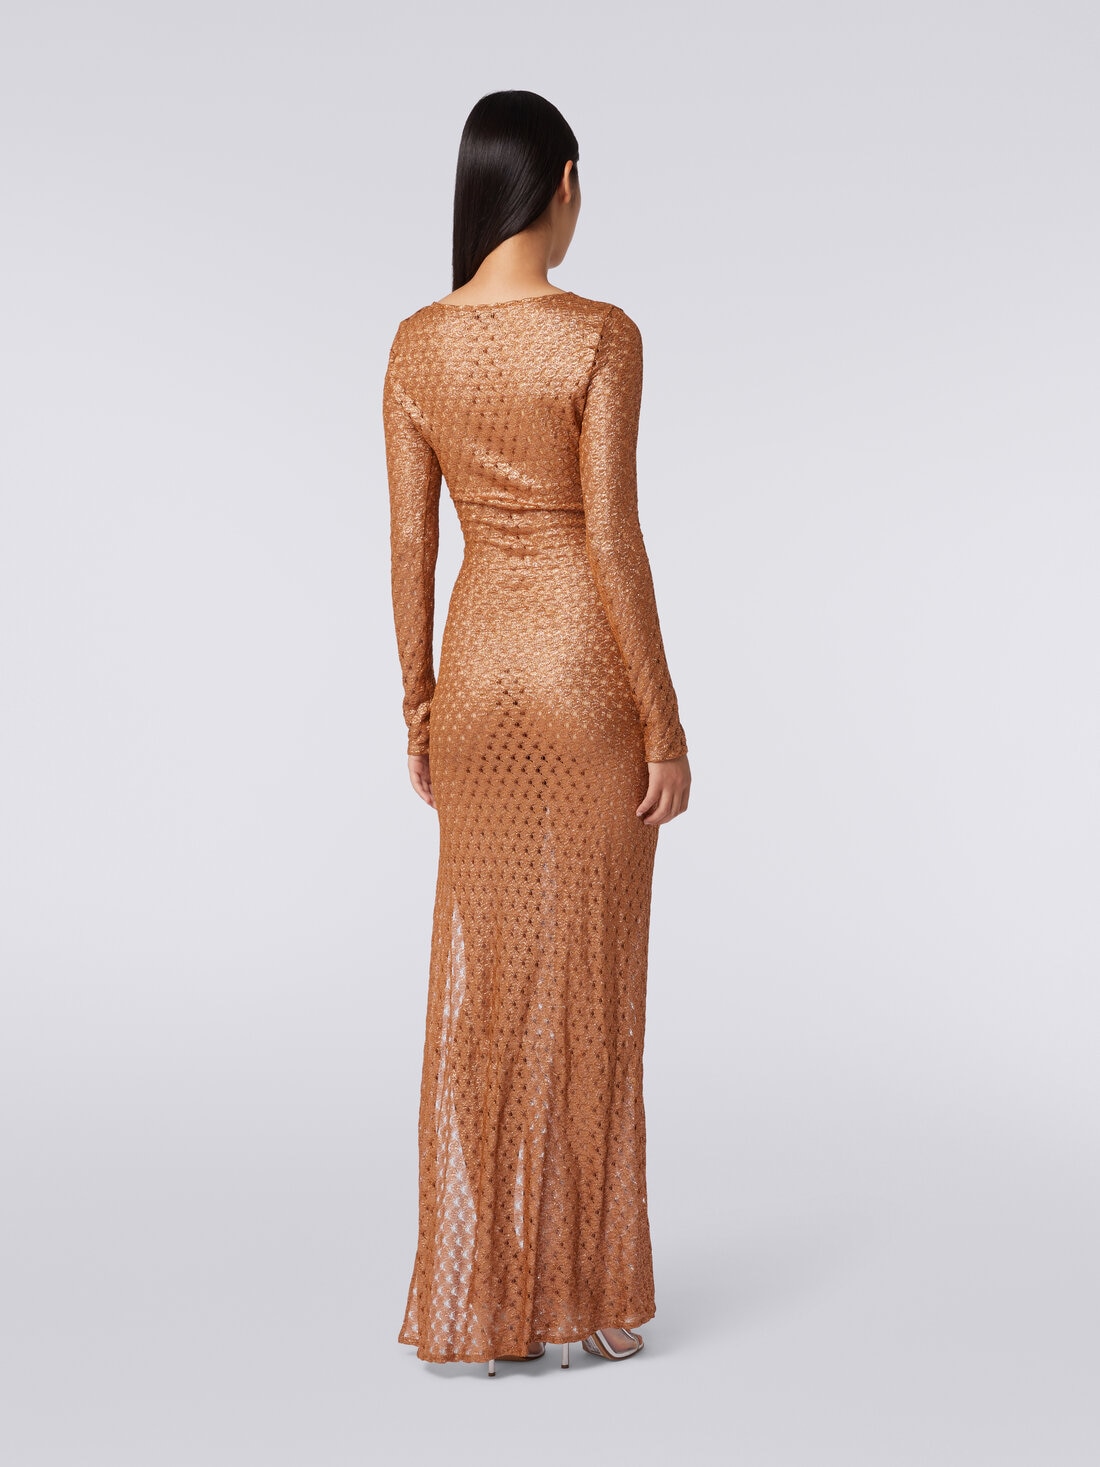 Long lace-effect dress with V neckline and appliqués, Brown - MS24SQ01BR00TC71052 - 3